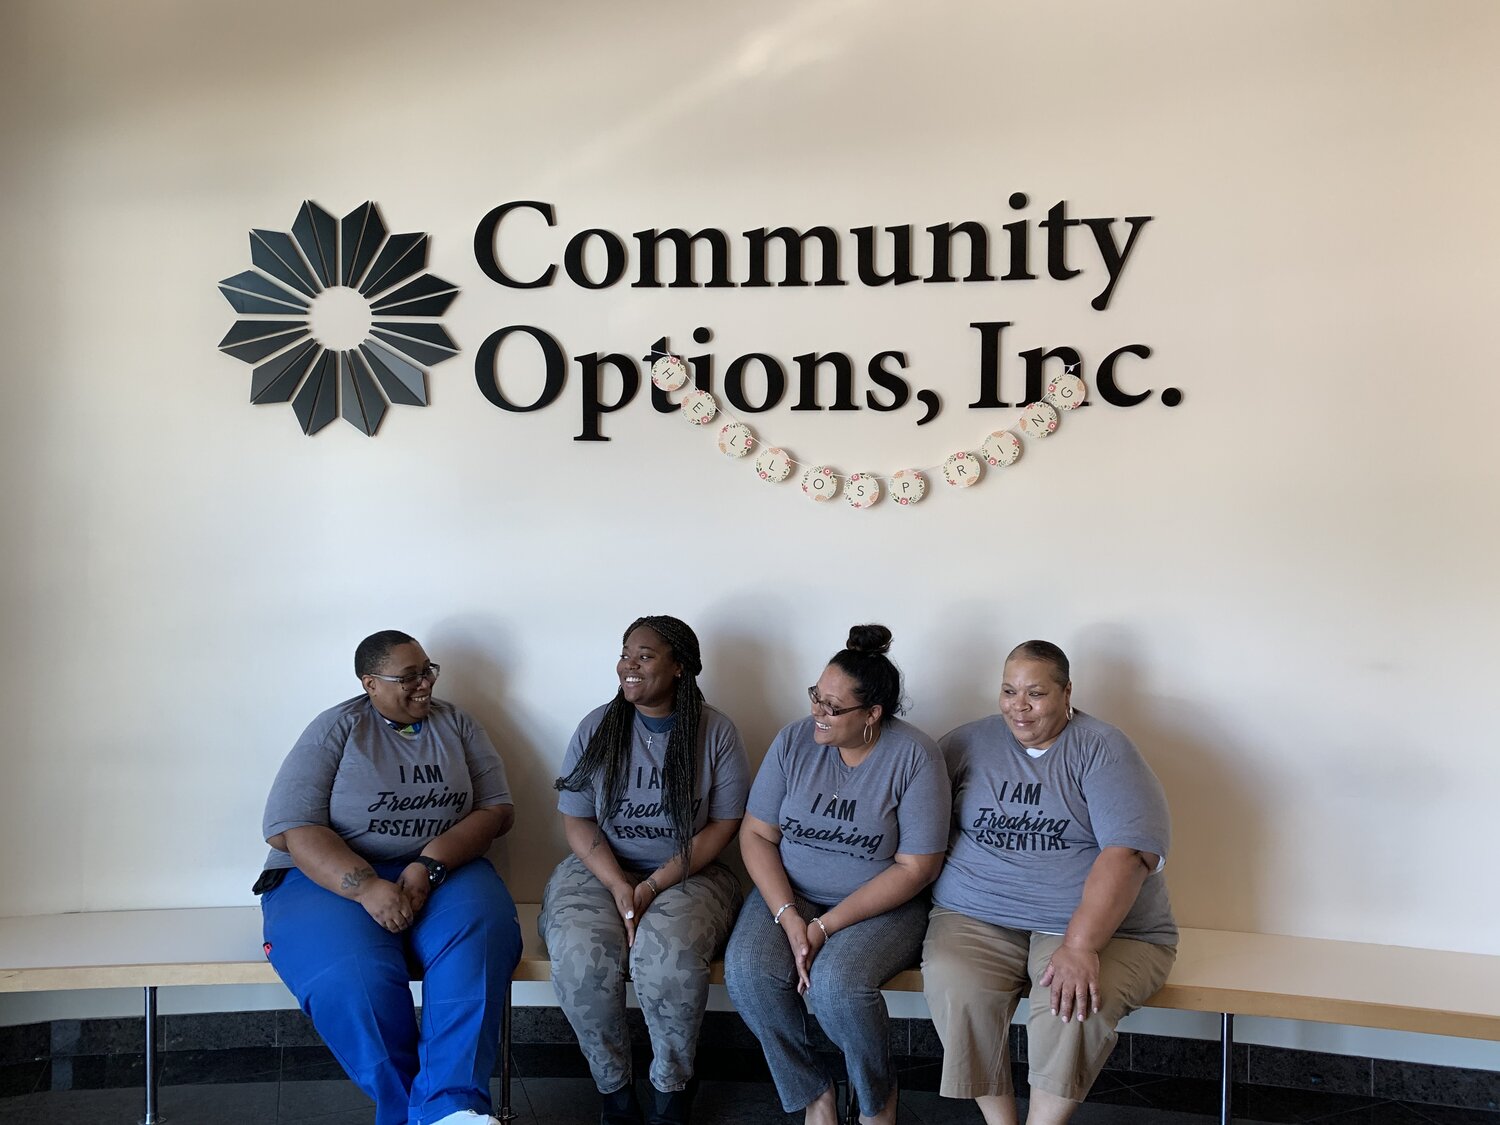 Essential personnel at Community Options, Inc. continue to provide daily service to their clients. - PHOTOS BY JAN OSBORN